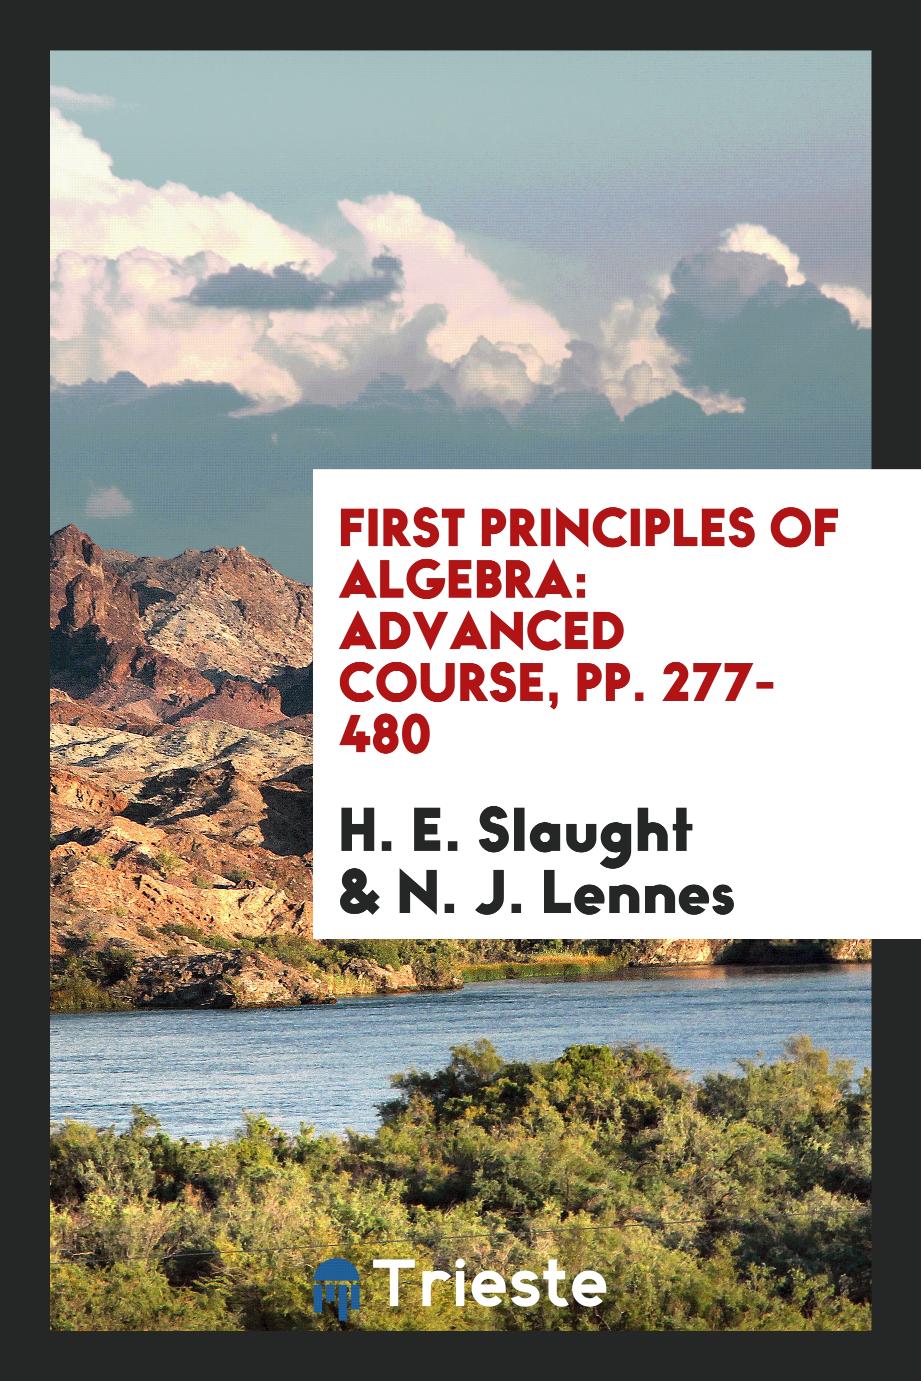 First Principles of Algebra: Advanced Course, pp. 277-480